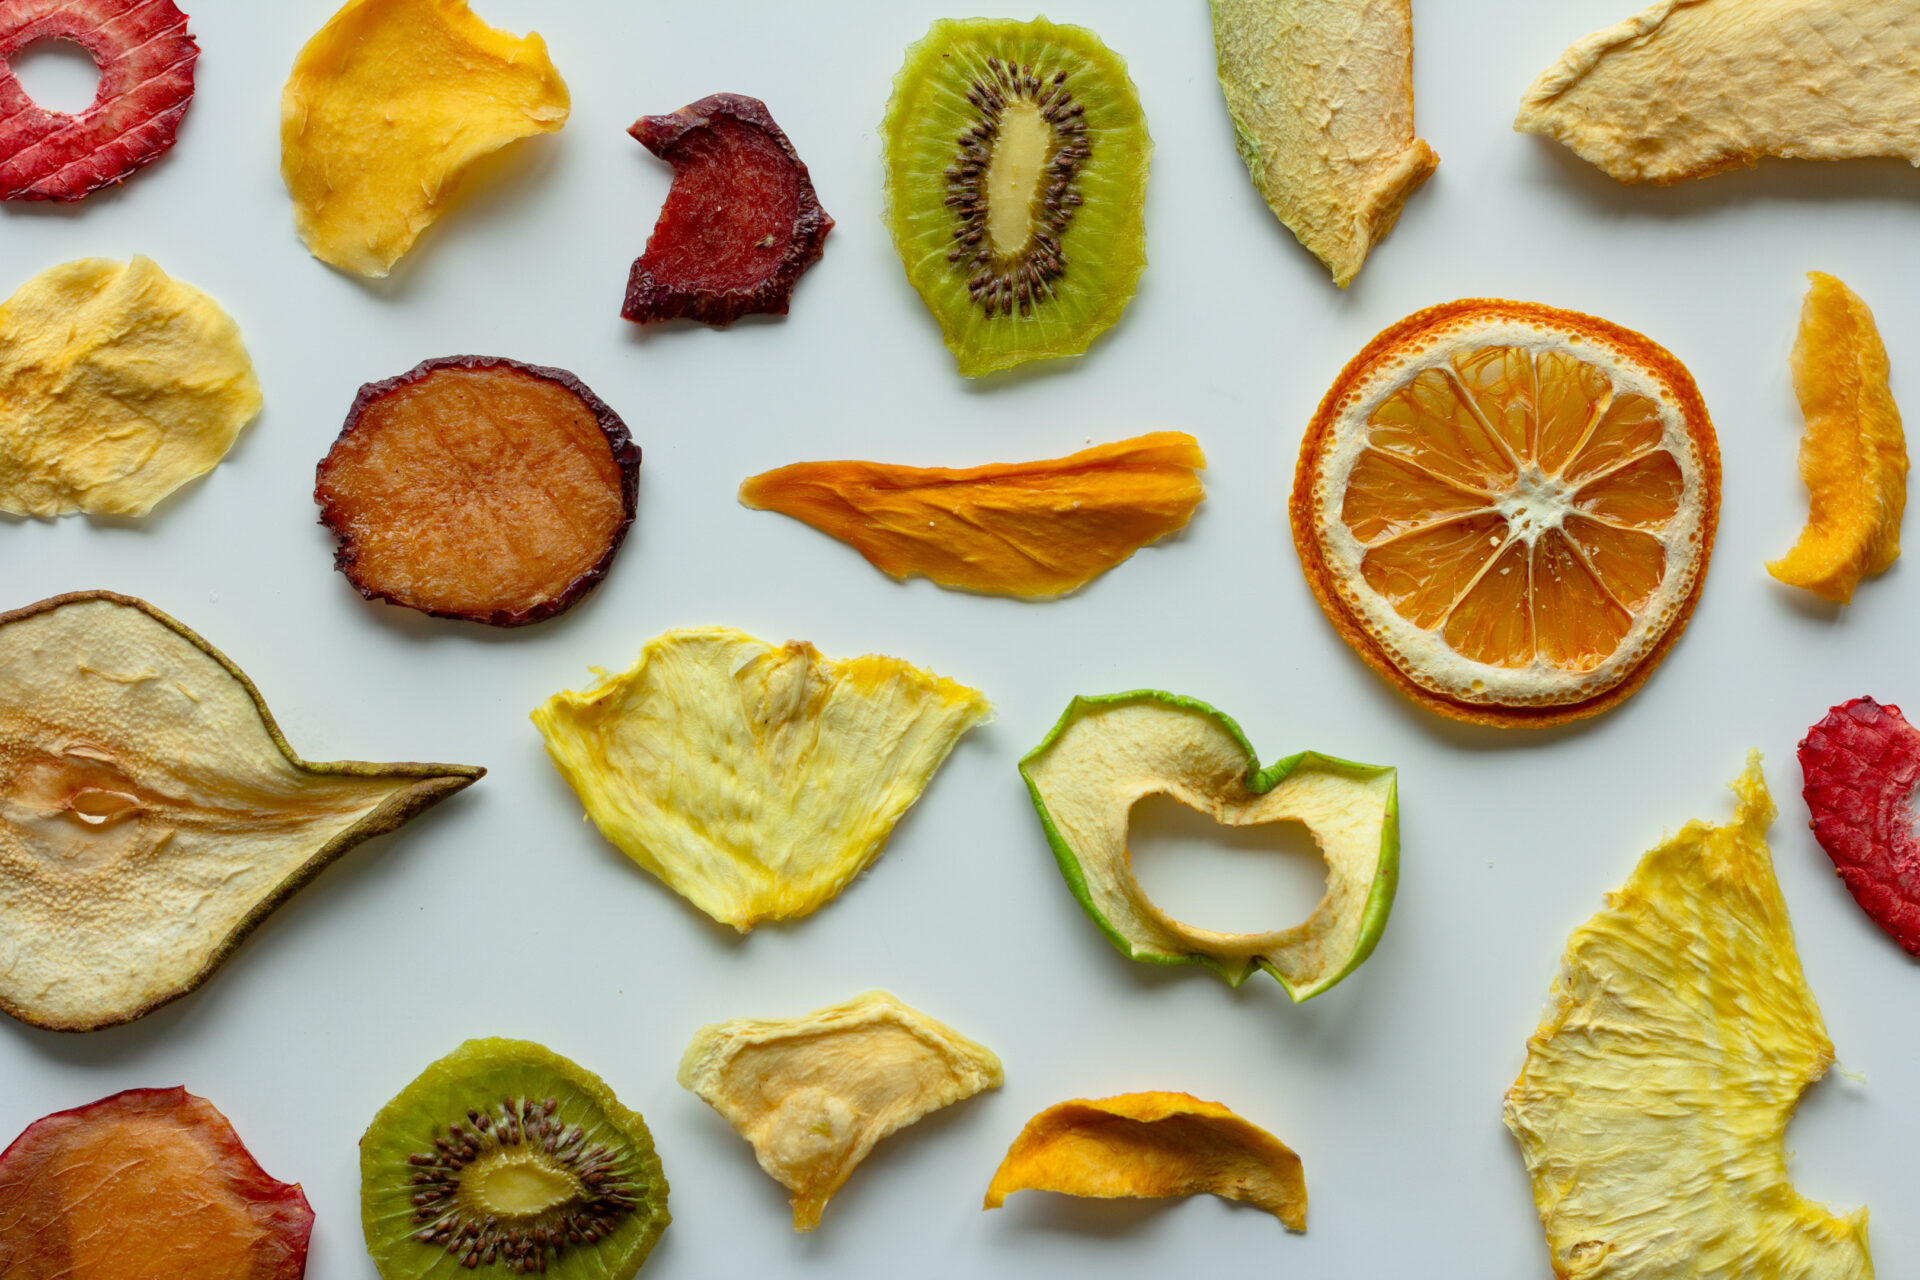 Vibrant and delicious freeze-dried fruit, retaining its natural color and taste.